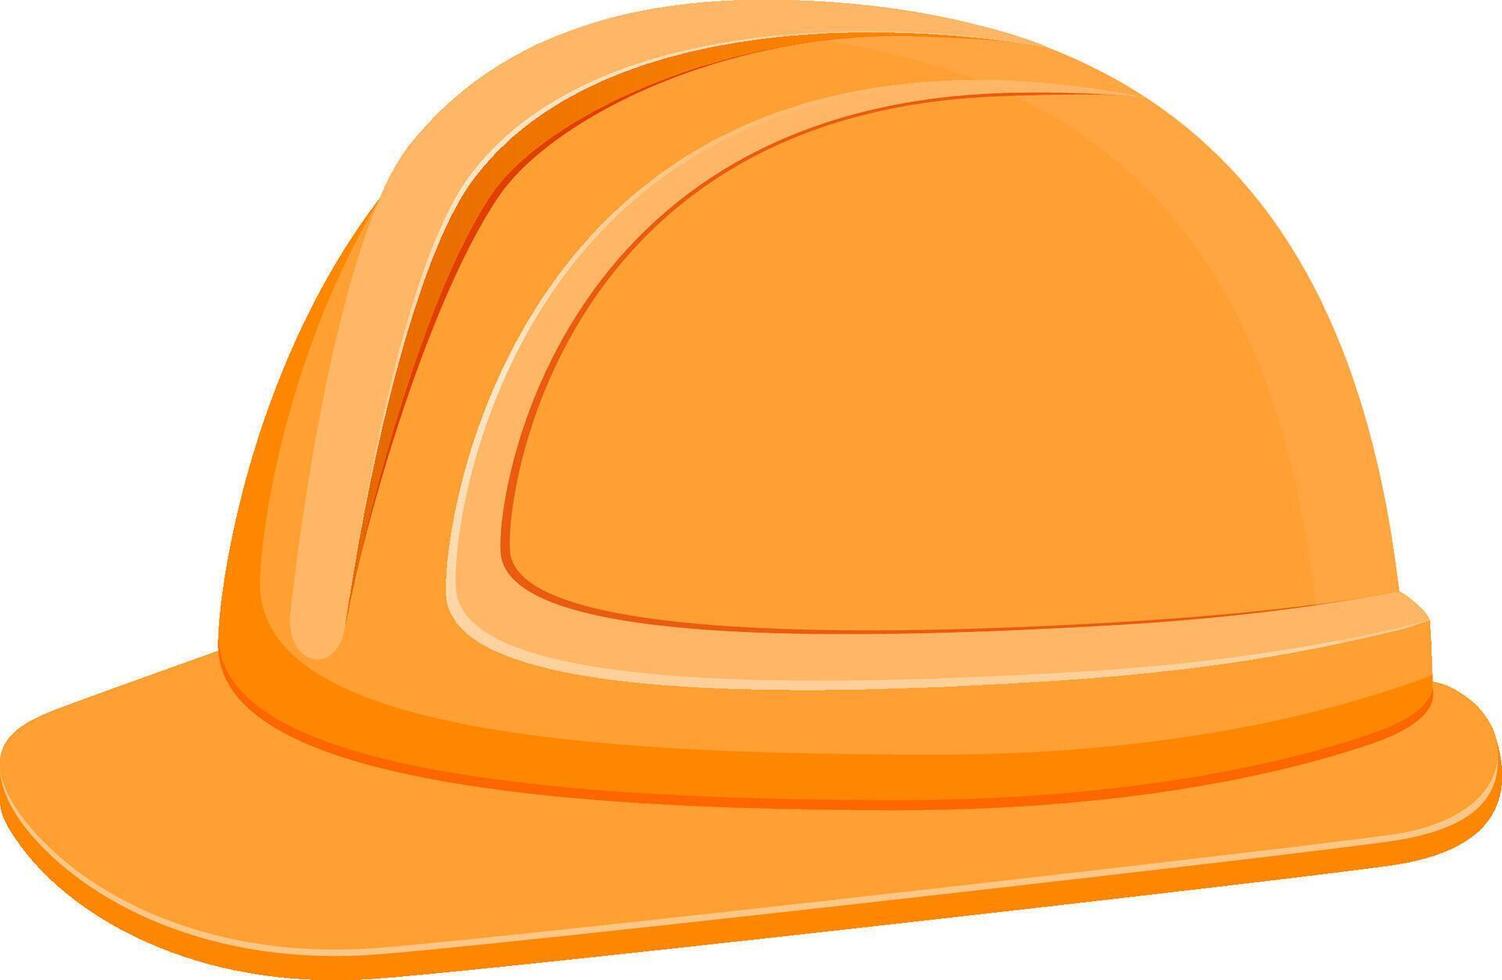 plastic helmet to protect the head in construction or repair stock vector illustration isolated on white background